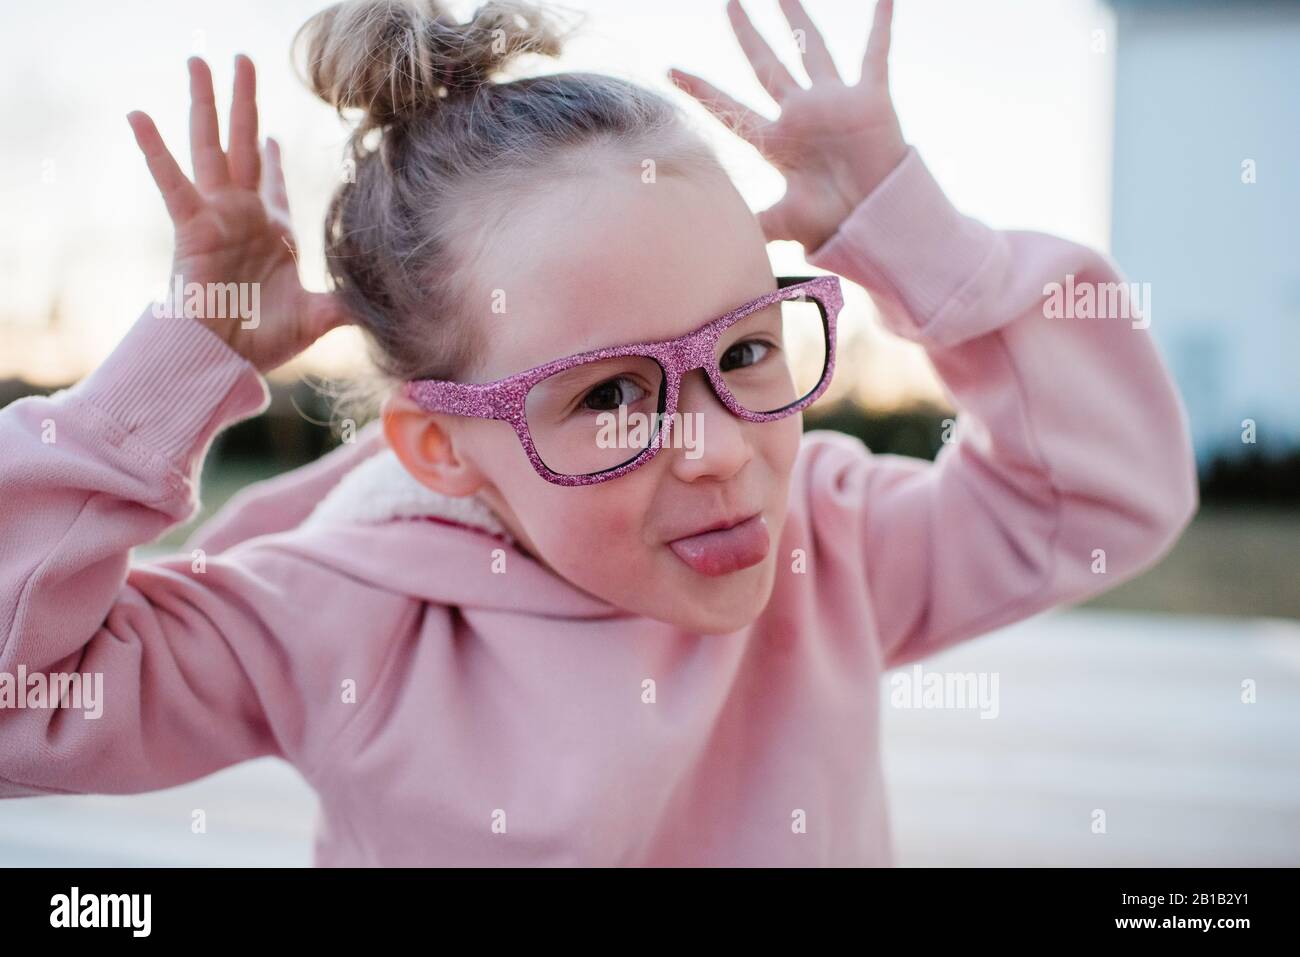 portrait of a young girl pulling silly faces with sparkly glasses on Stock Photo